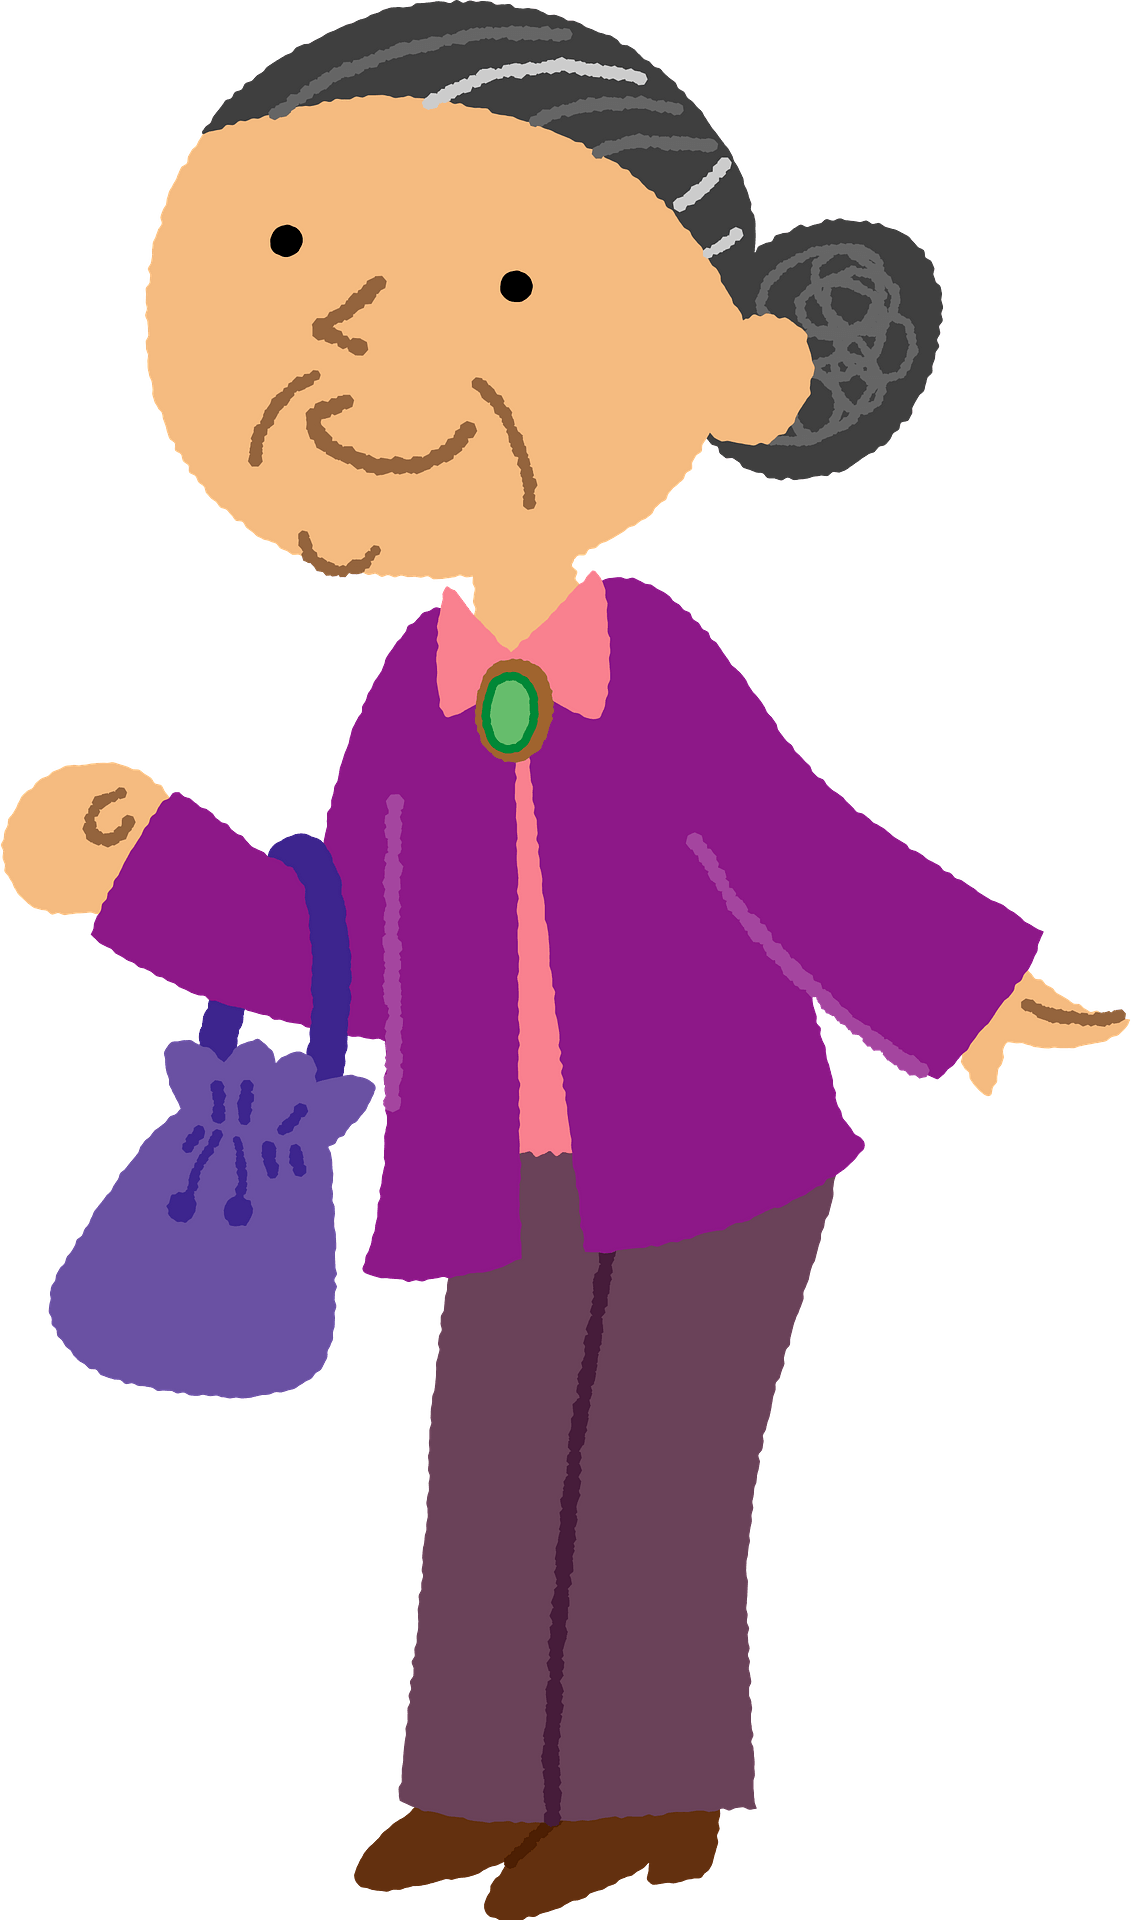 610 Older Women Empowerment Illustrations Royalty Free Vector Clip